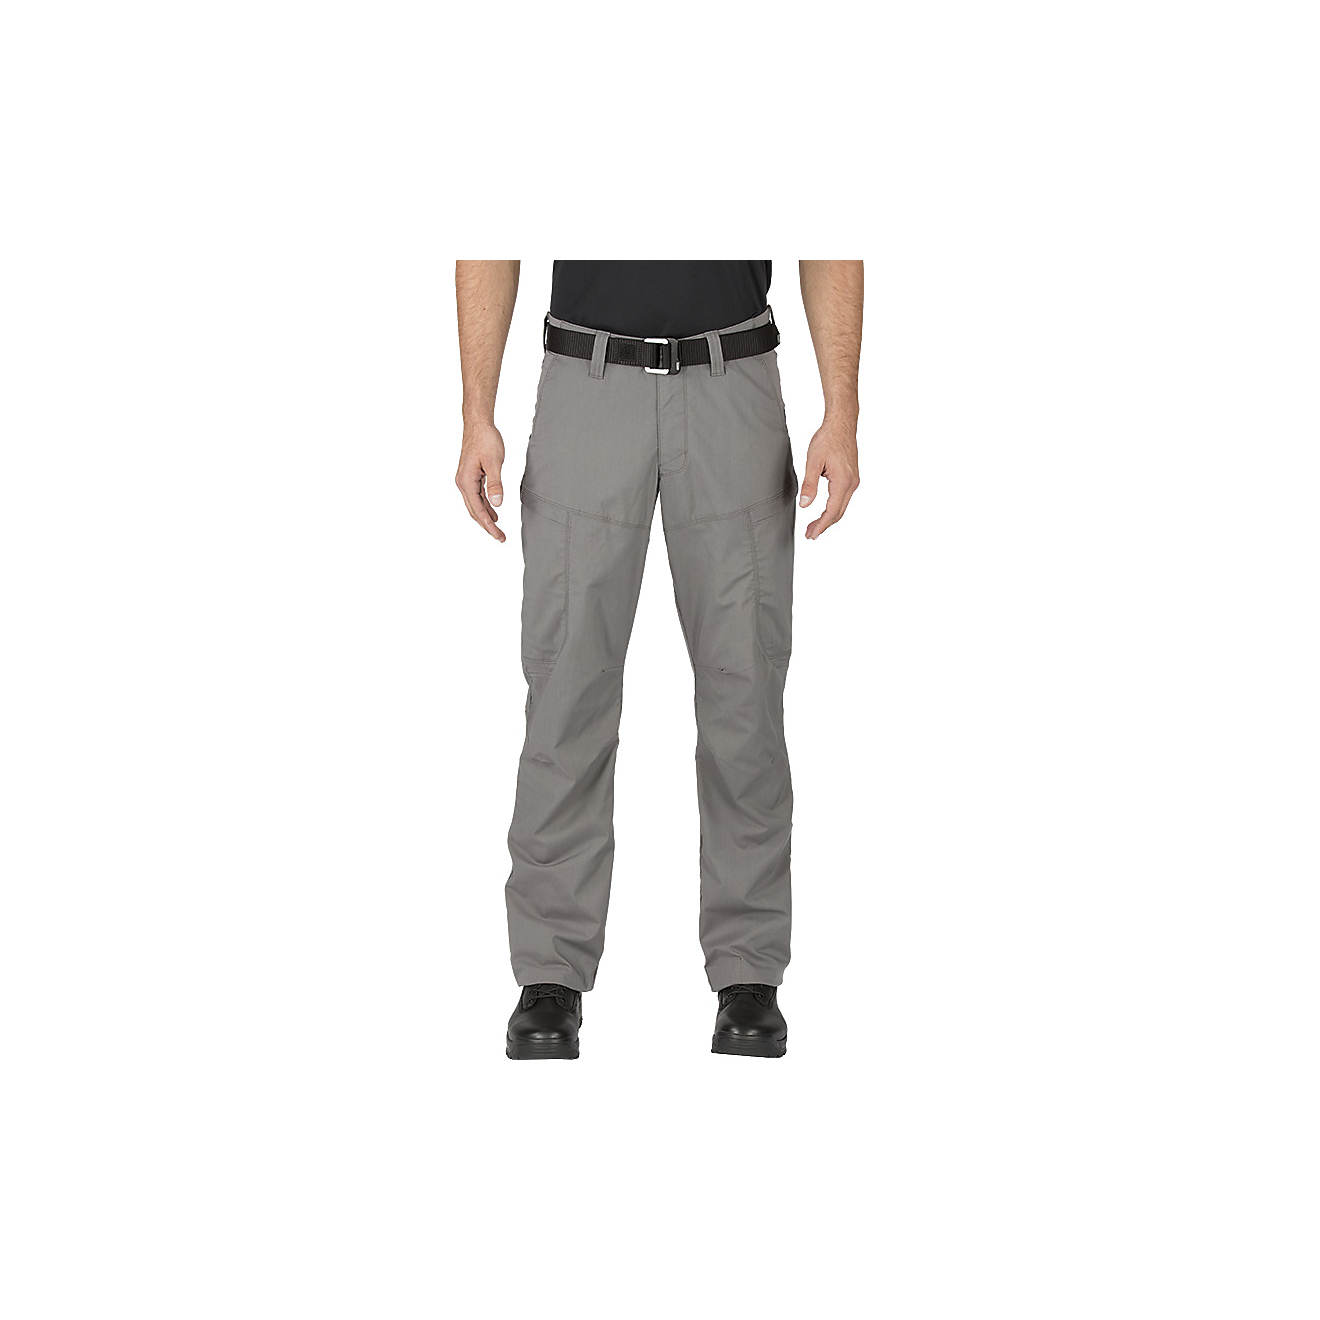 5.11 Men's Tactical Apex Pant | Free Shipping at Academy